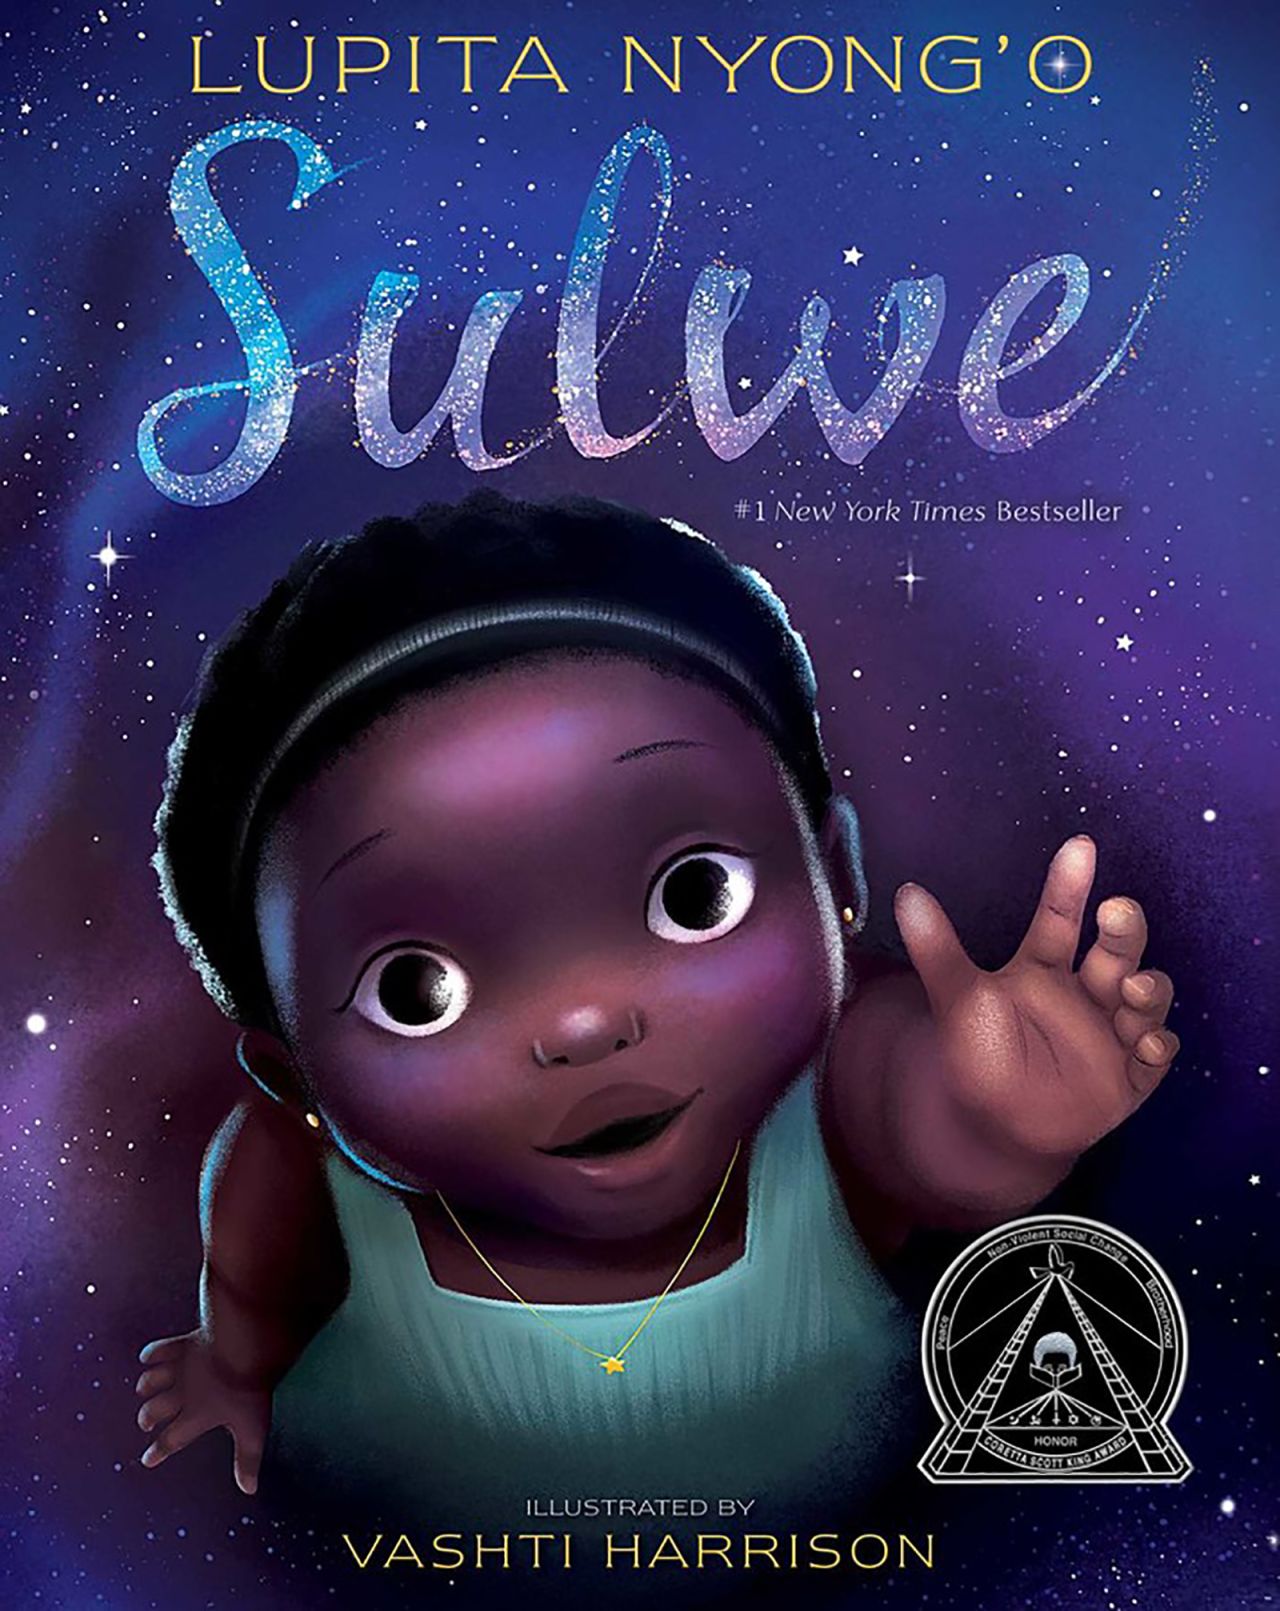 Oscar-winning actress Lupita Nyong'o introduces us to "Sulwe," a girl whose skin is as black as midnight.